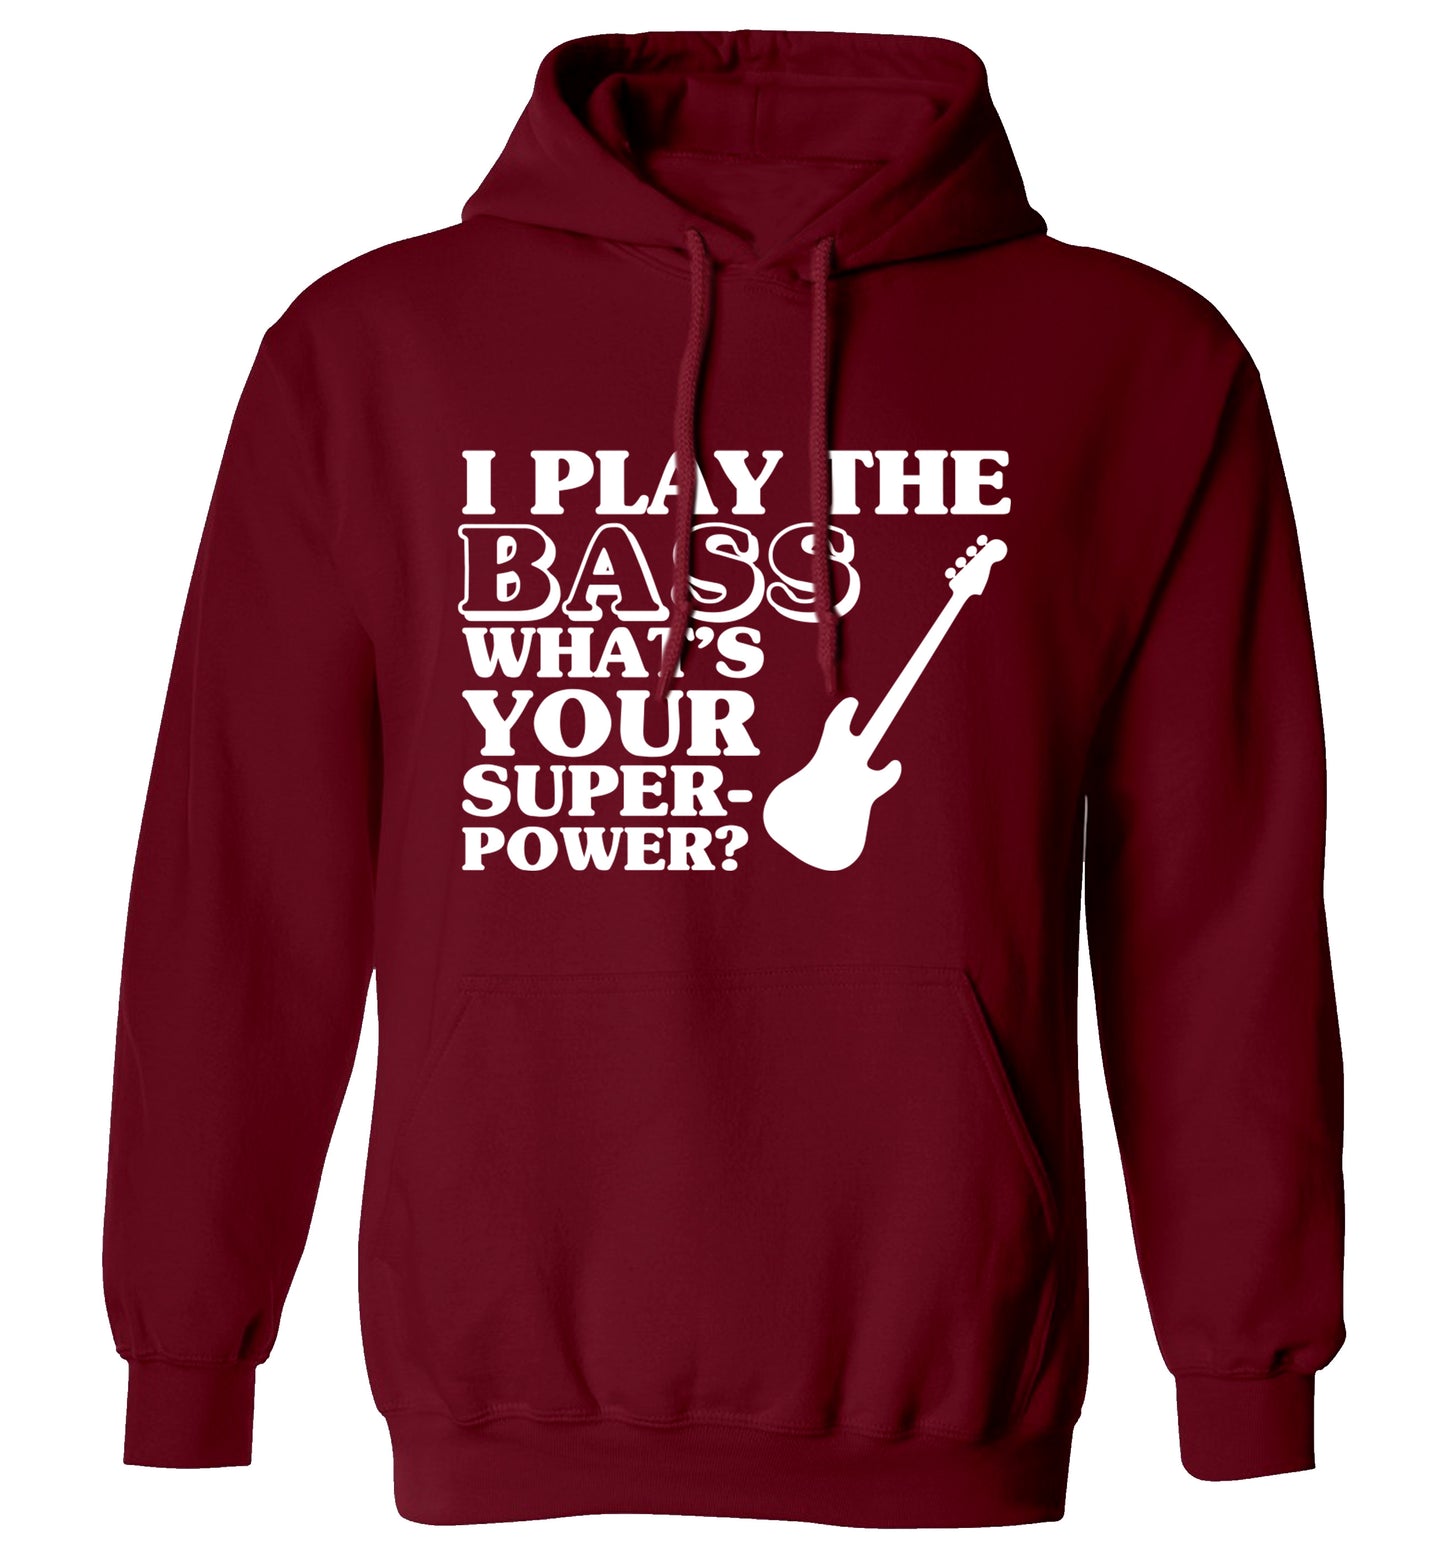 I play the bass what's your superpower? adults unisex maroon hoodie 2XL